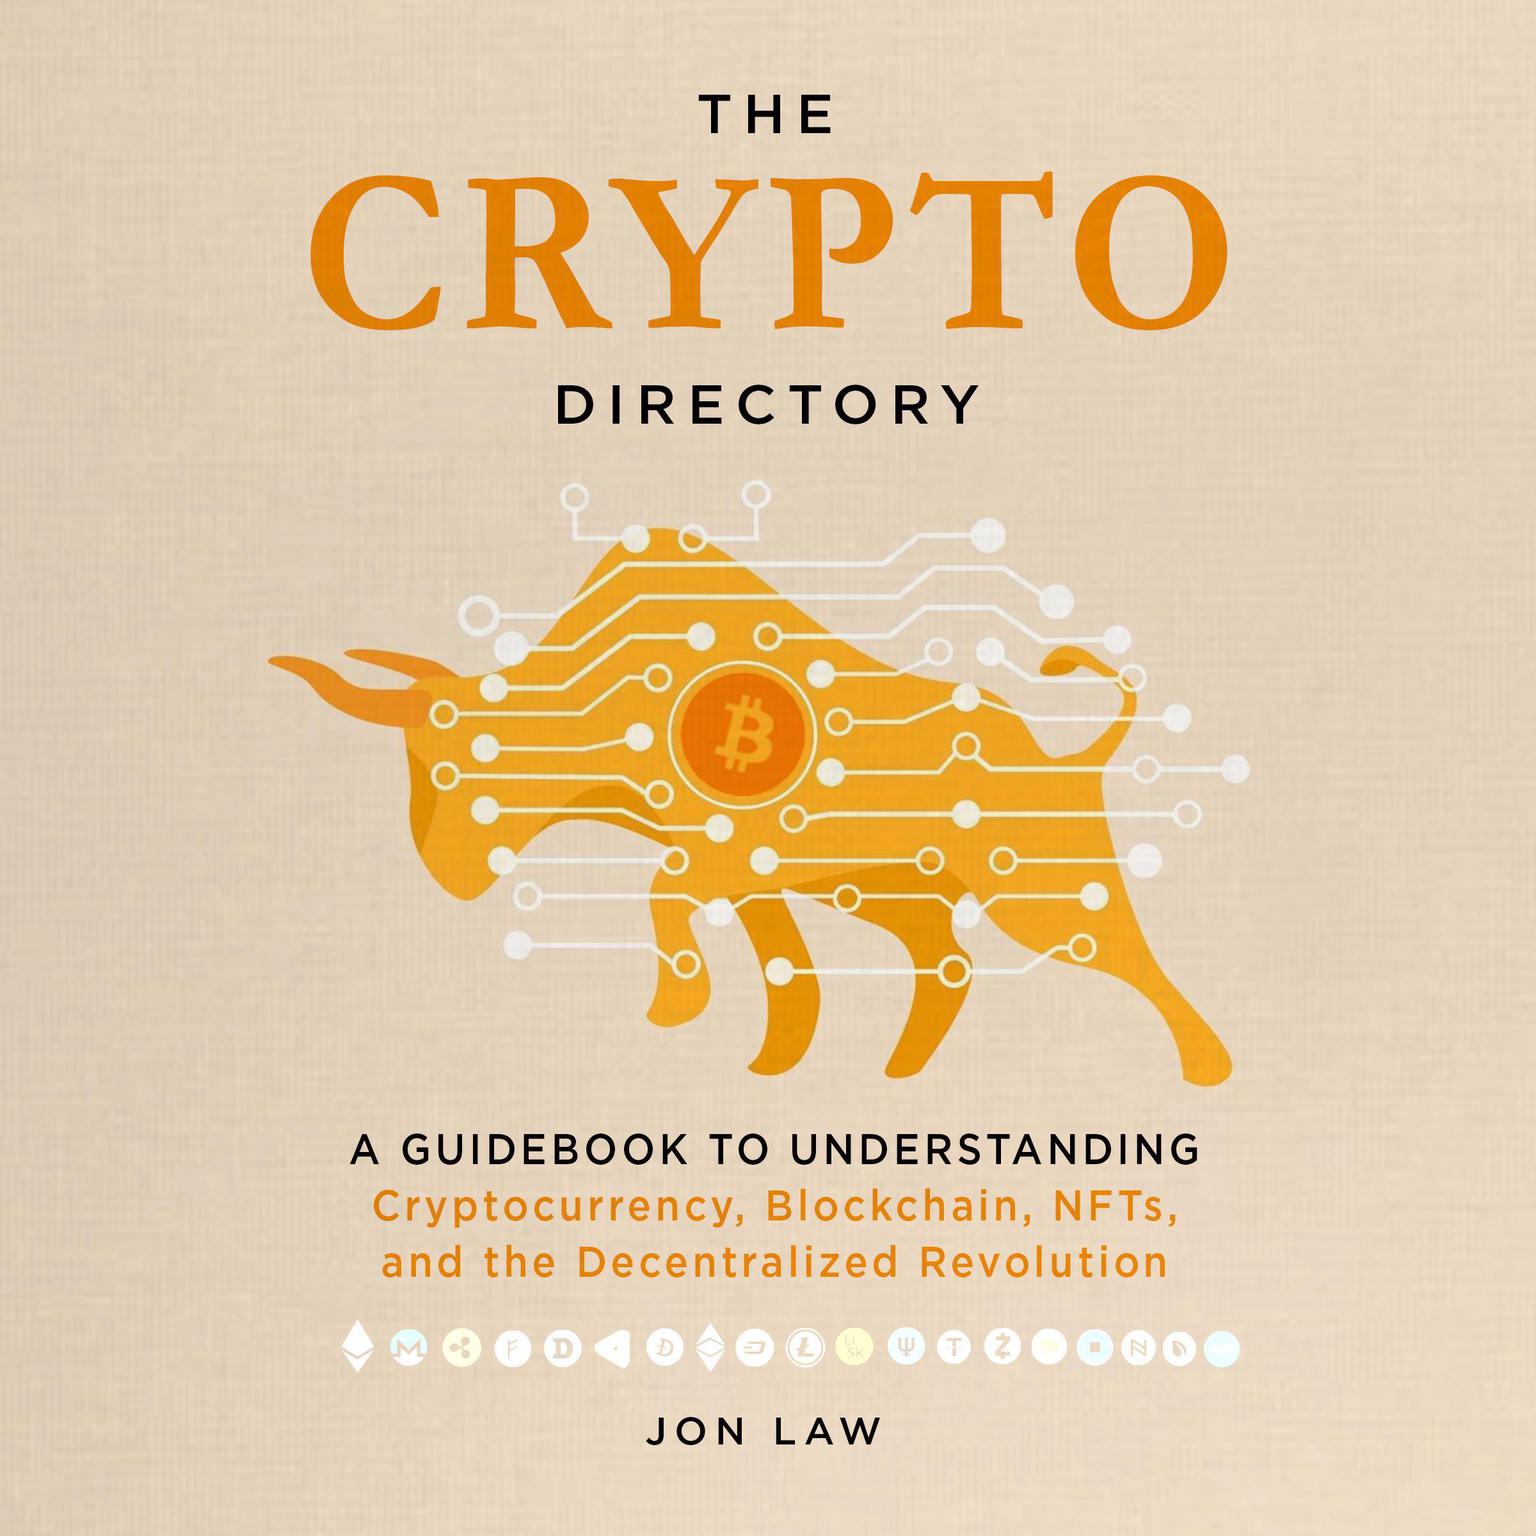 The Crypto Directory: A Guidebook to Understanding Cryptocurrency, Blockchain, NFTs, and the Decentralized Revolution Audiobook, by Jon Law